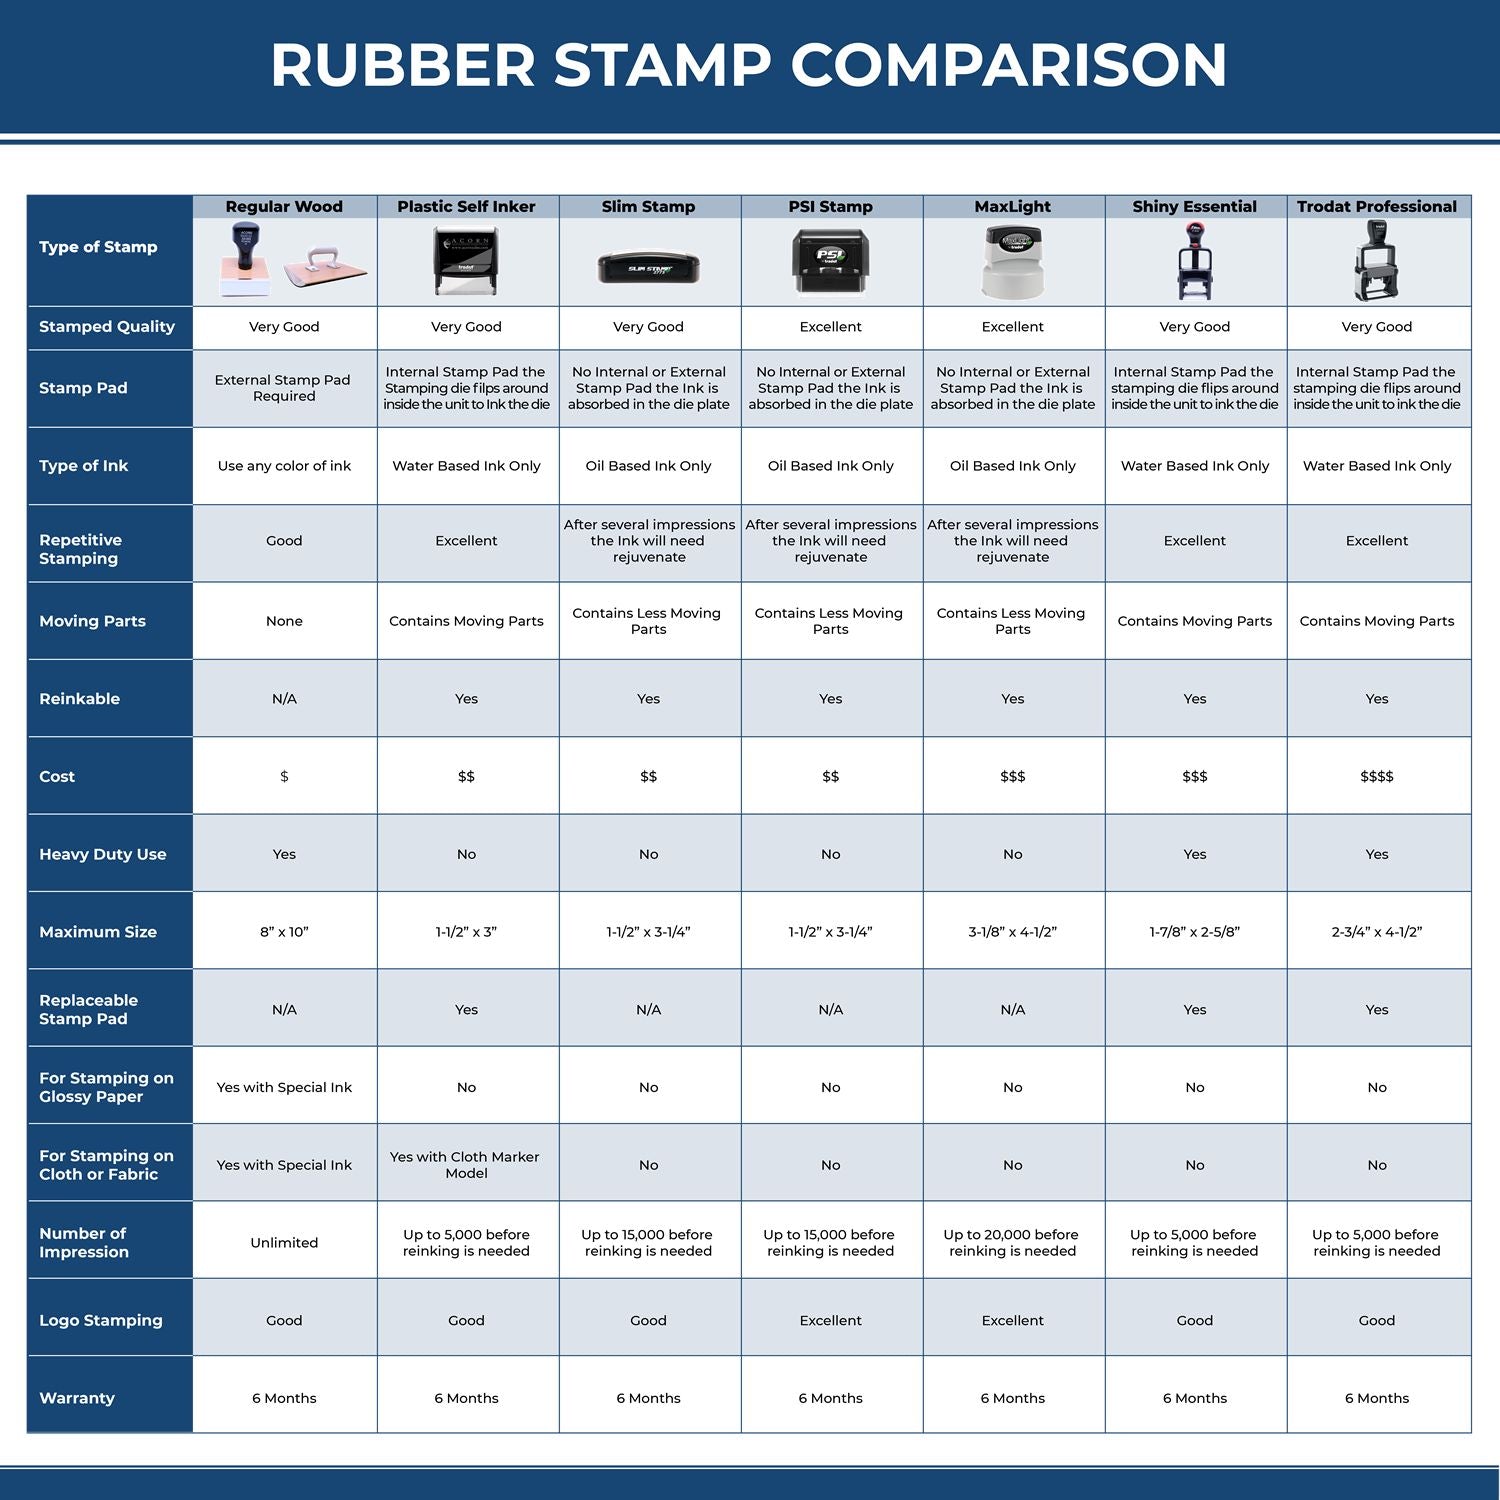 A comparison chart for the different types of mount models available for the Premium MaxLight Pre-Inked Delaware Landscape Architectural Stamp.